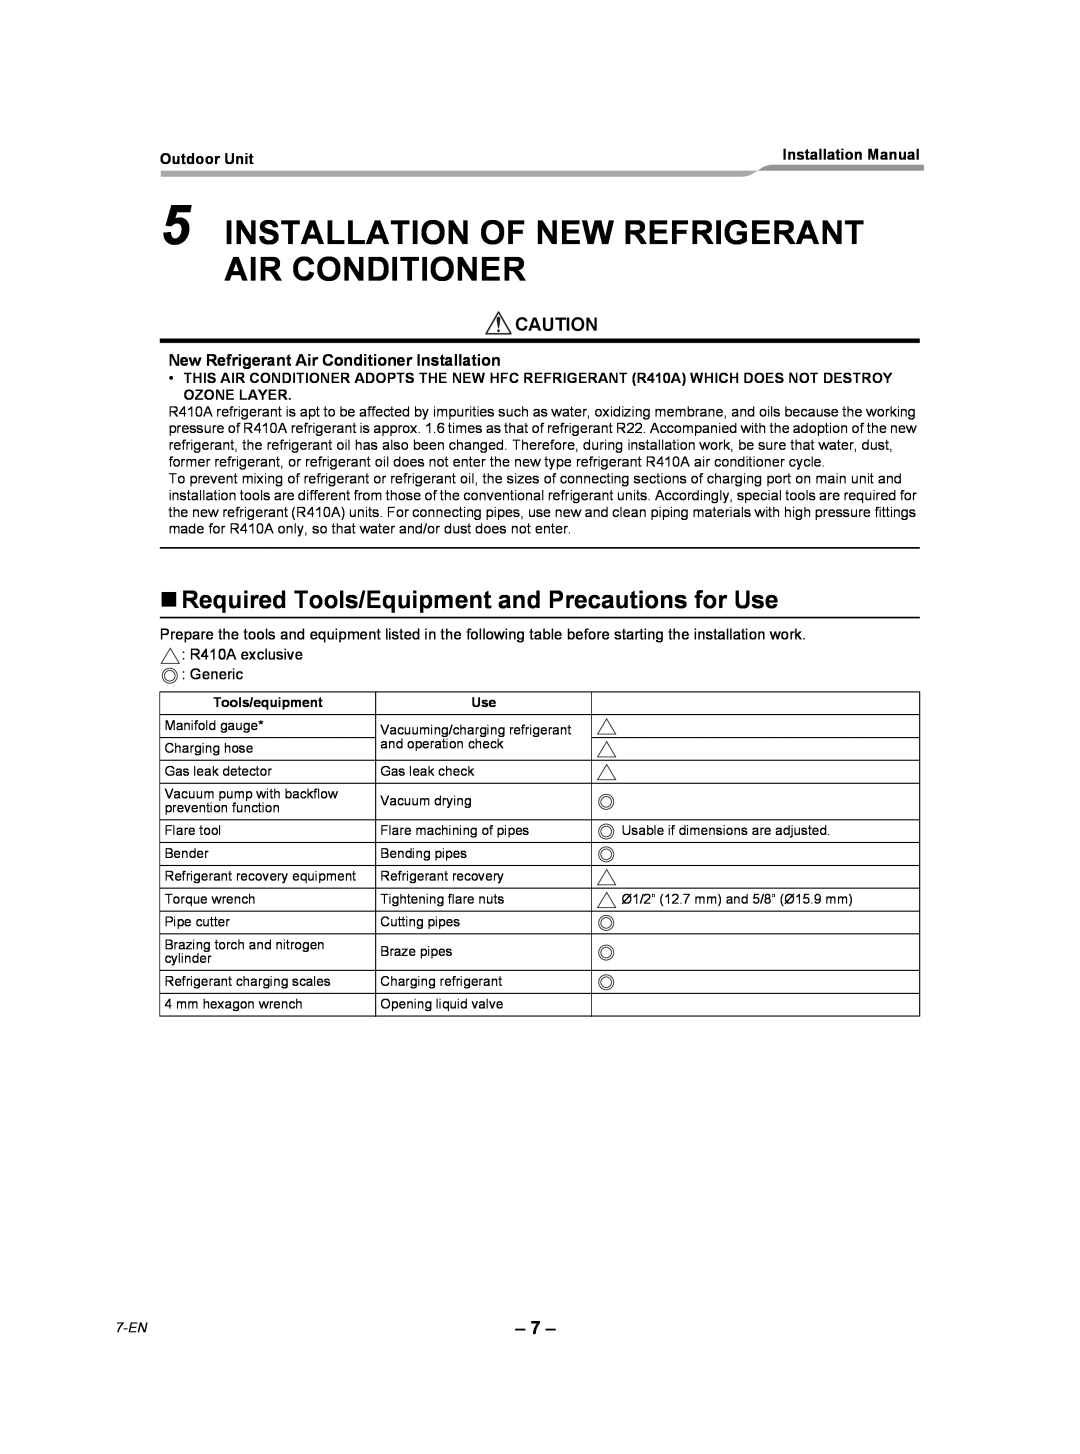 Toshiba RAV-SP420AT2-UL Installation Of New Refrigerant Air Conditioner, „Required Tools/Equipment and Precautions for Use 